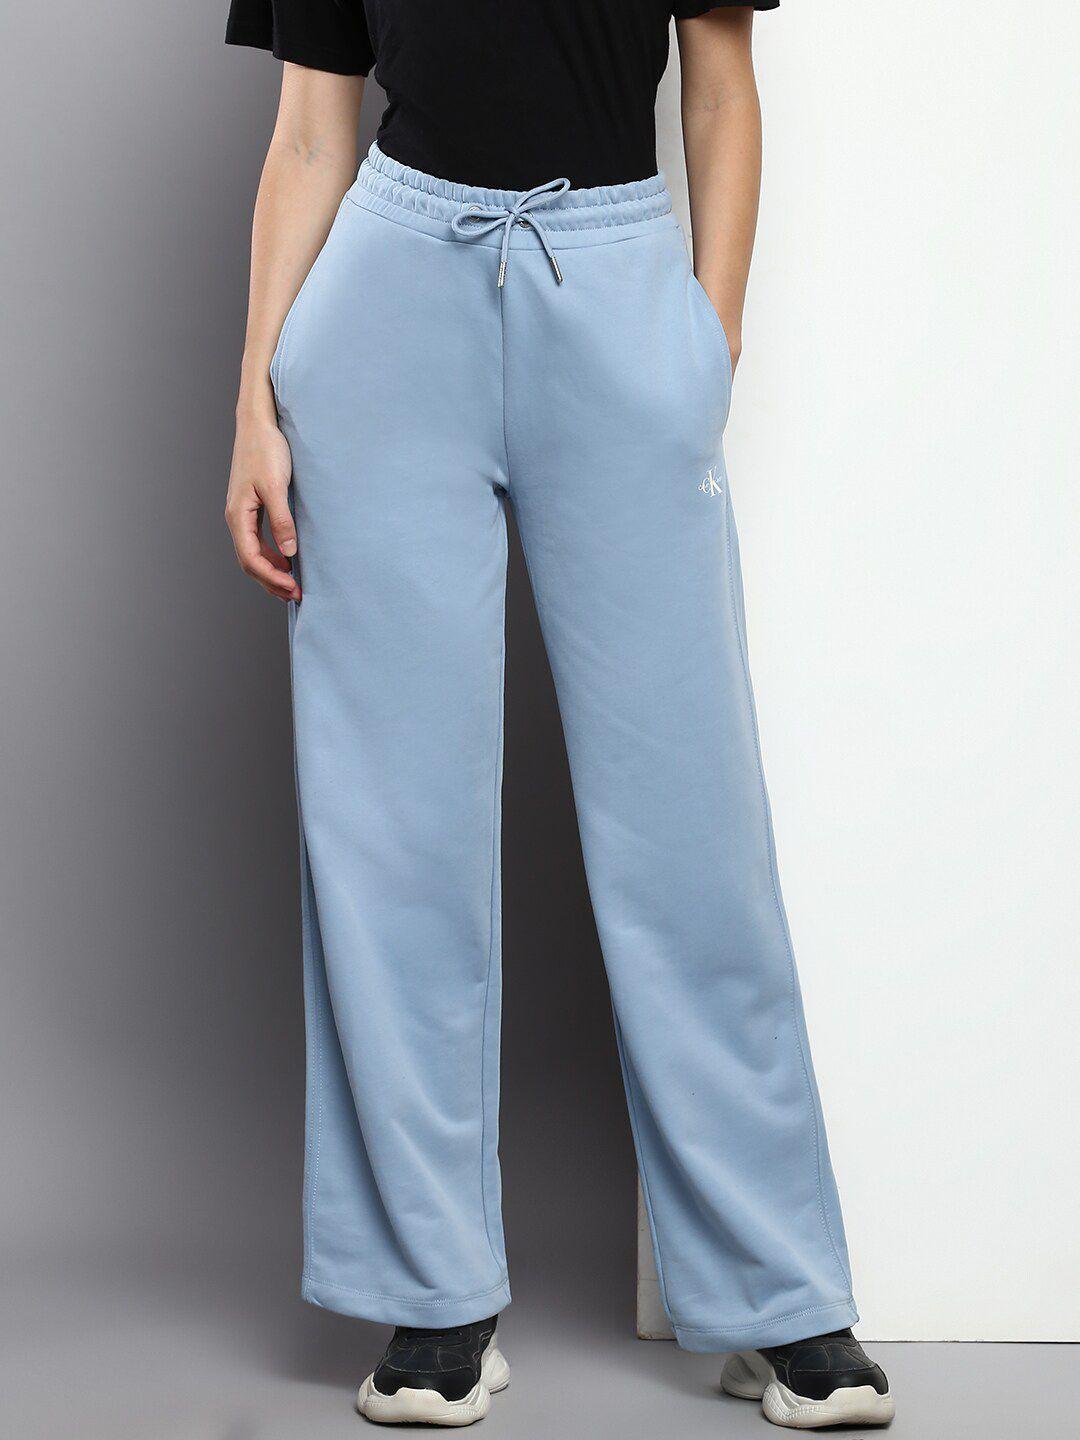 calvin klein jeans women organic cotton relaxed-fit track pants